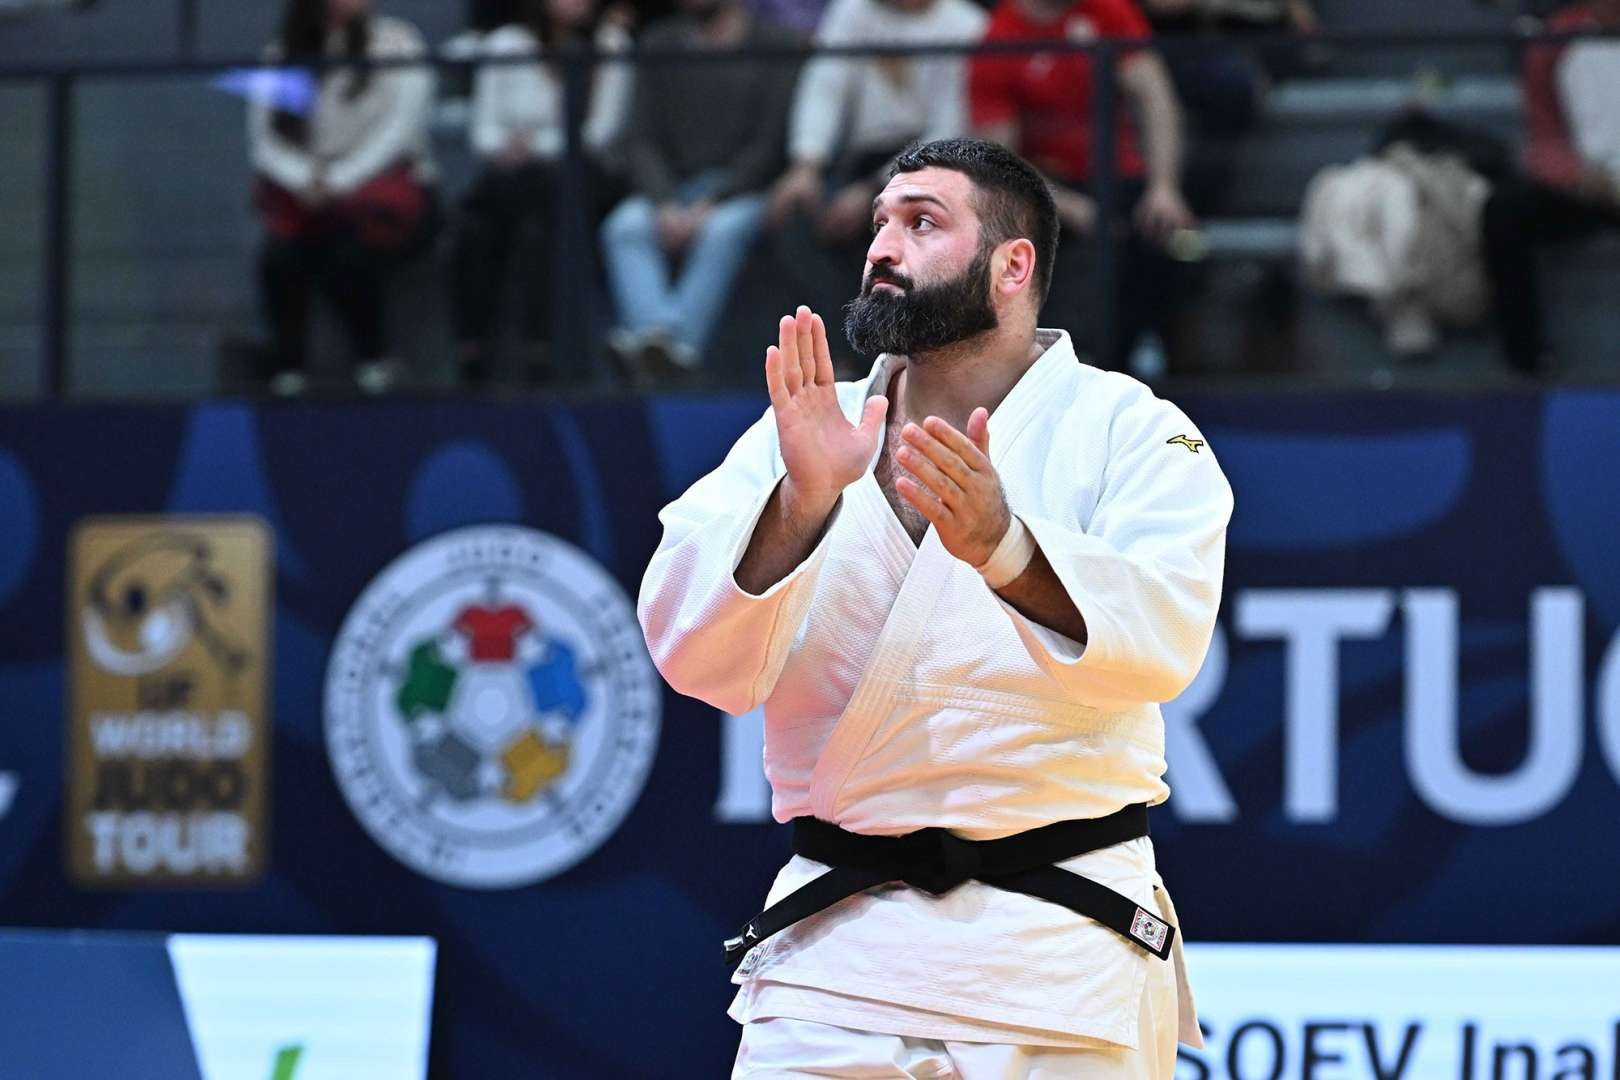 The last five Grand Prix Portugal gold medals won by European judokas